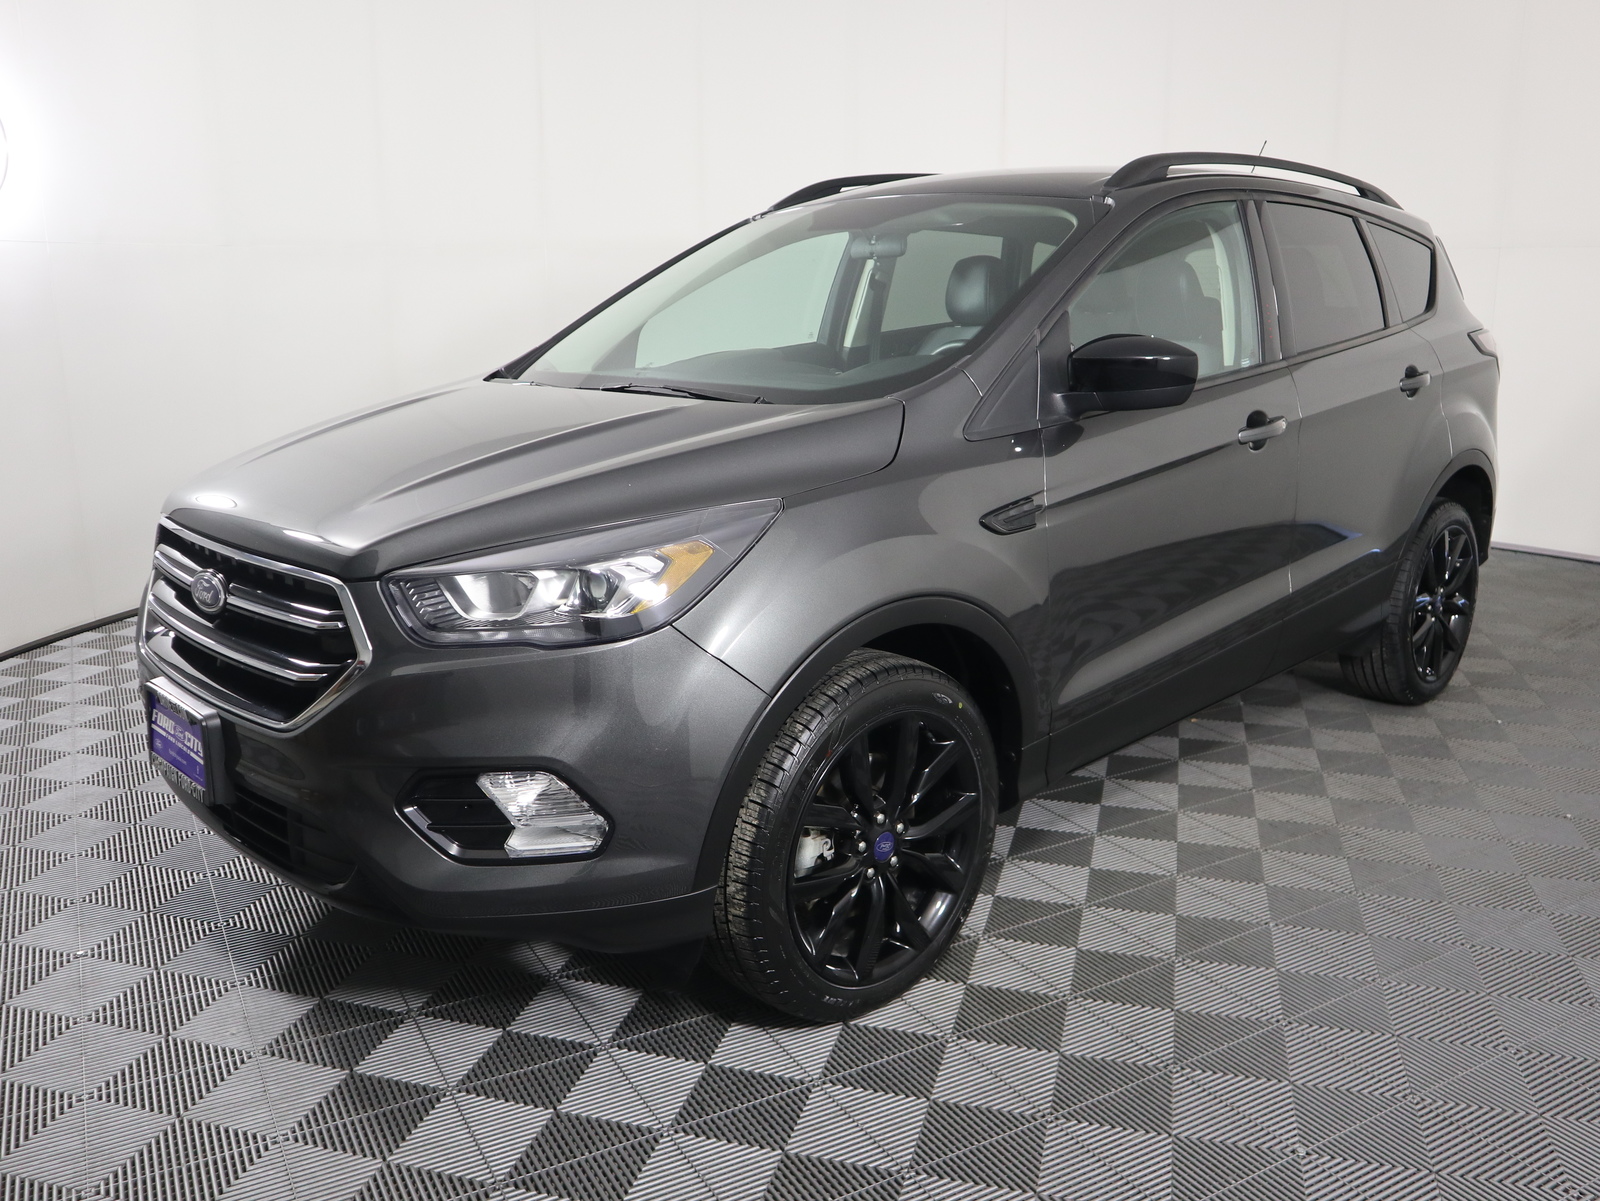 Pre-Owned 2018 Ford Escape SE 4WD Sport Utility in Savoy #M4168 | Drive217